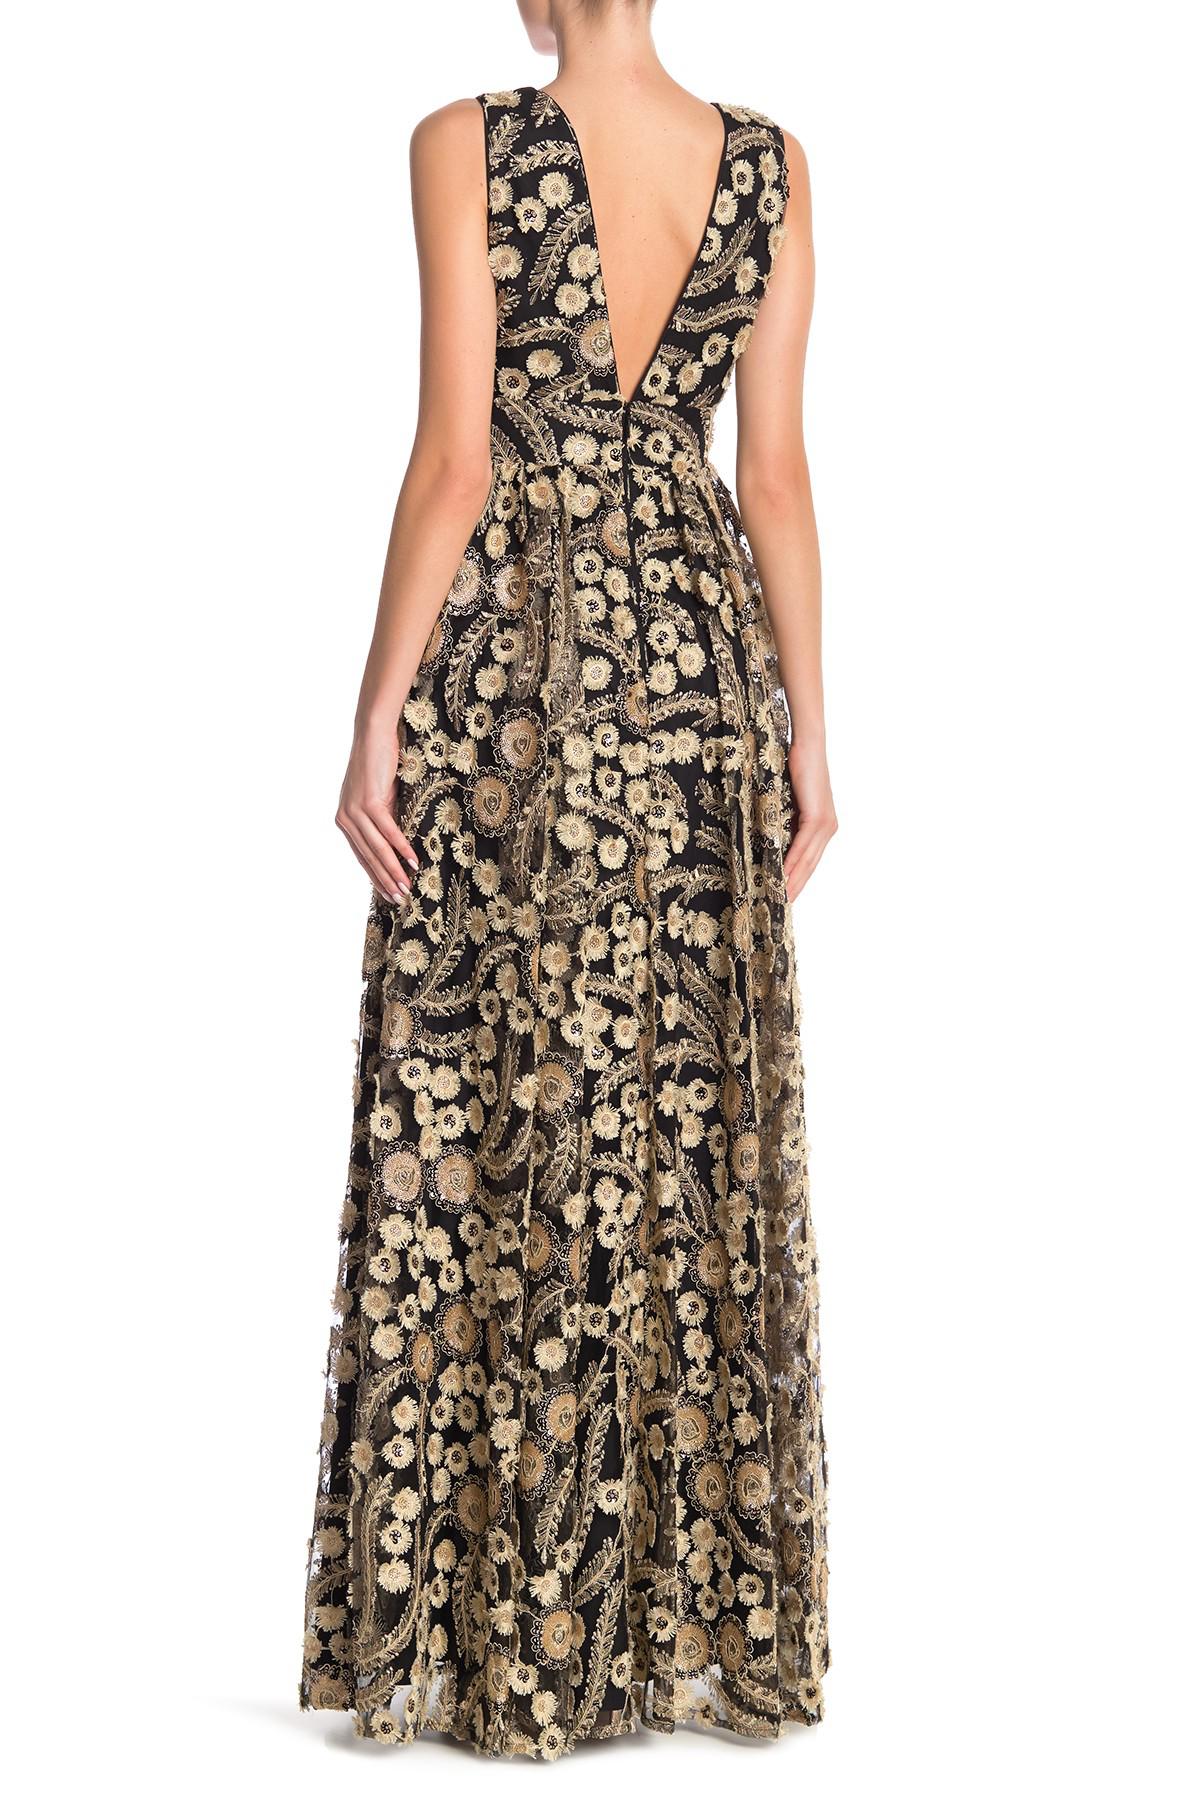 Ted Baker Double Layer Plunge Maxi Dress in Black - Lyst